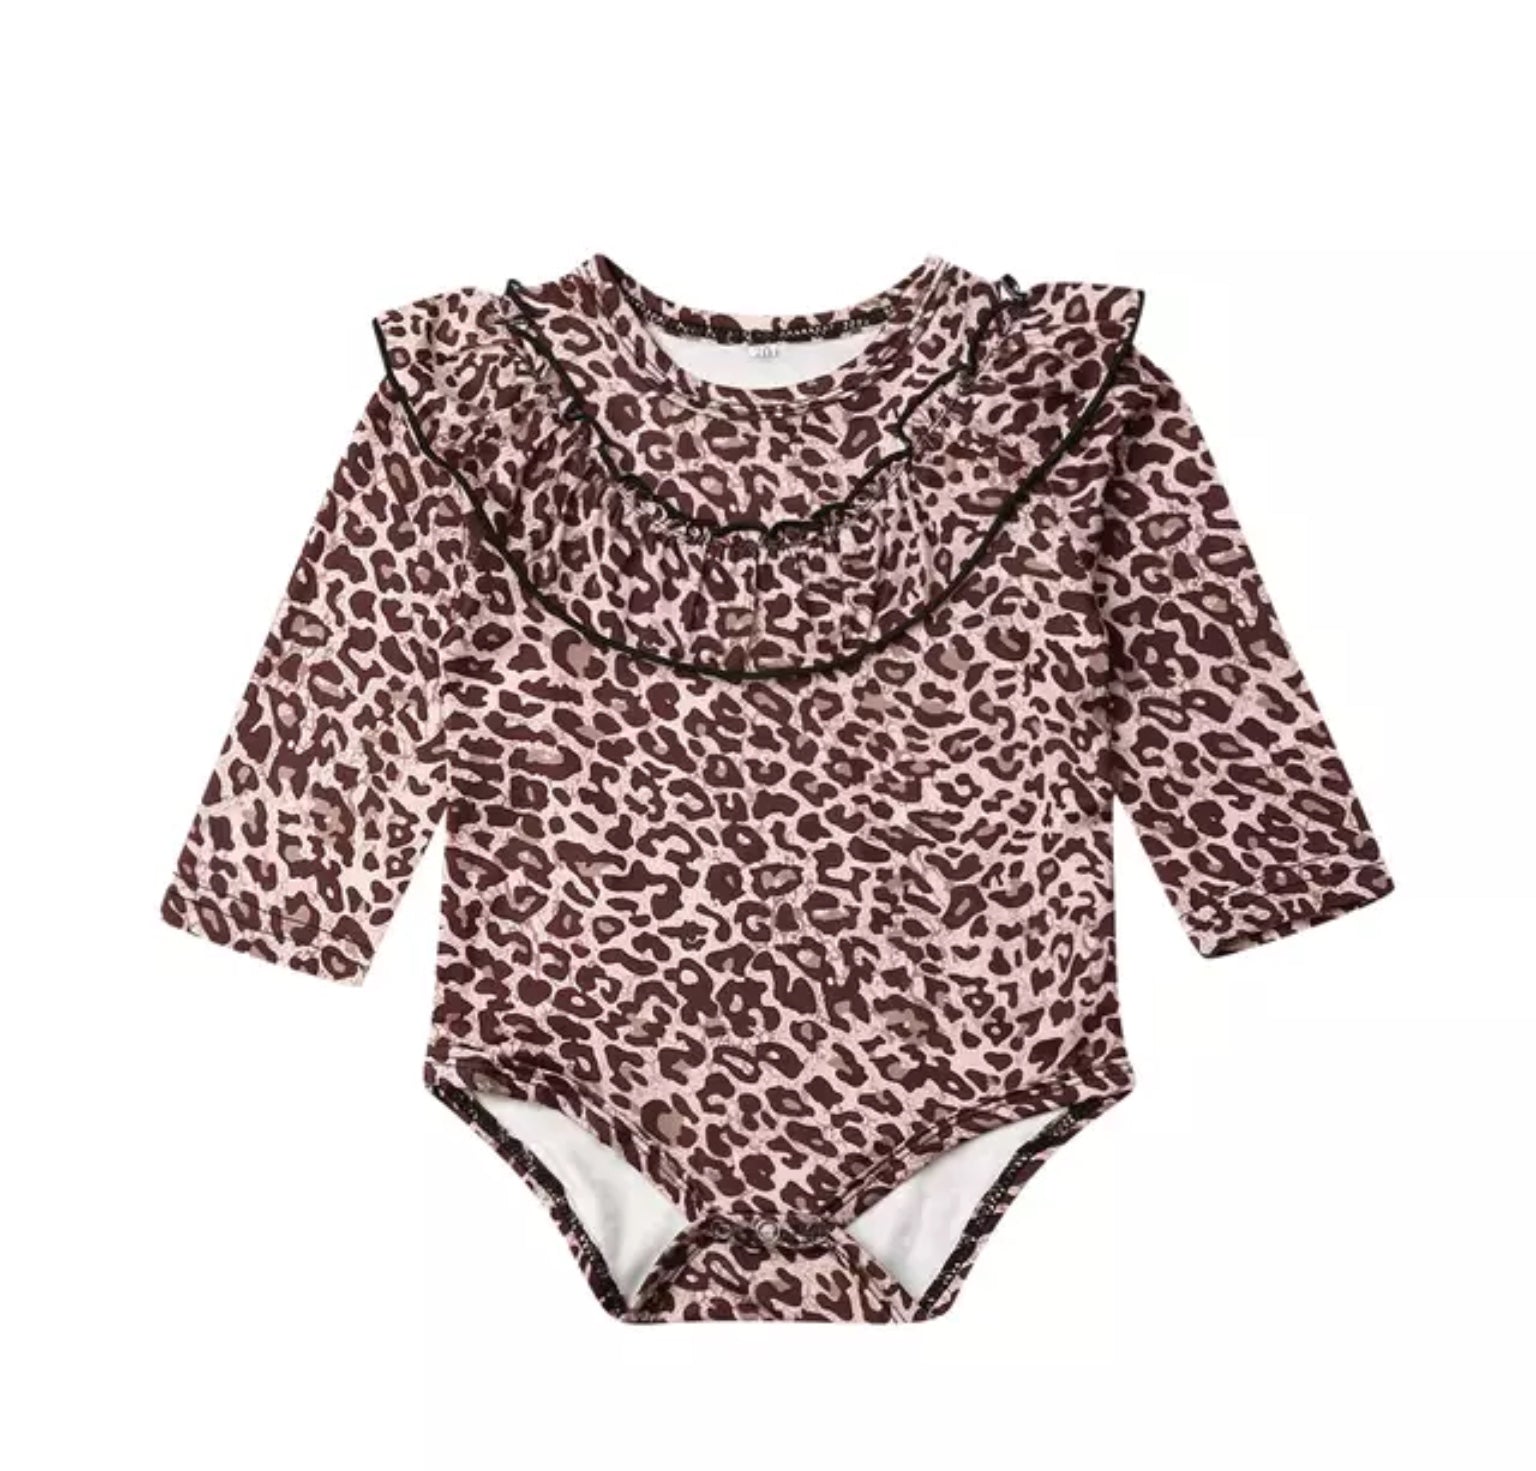 LEOPARD BROWN SPOTTED RUFFLE